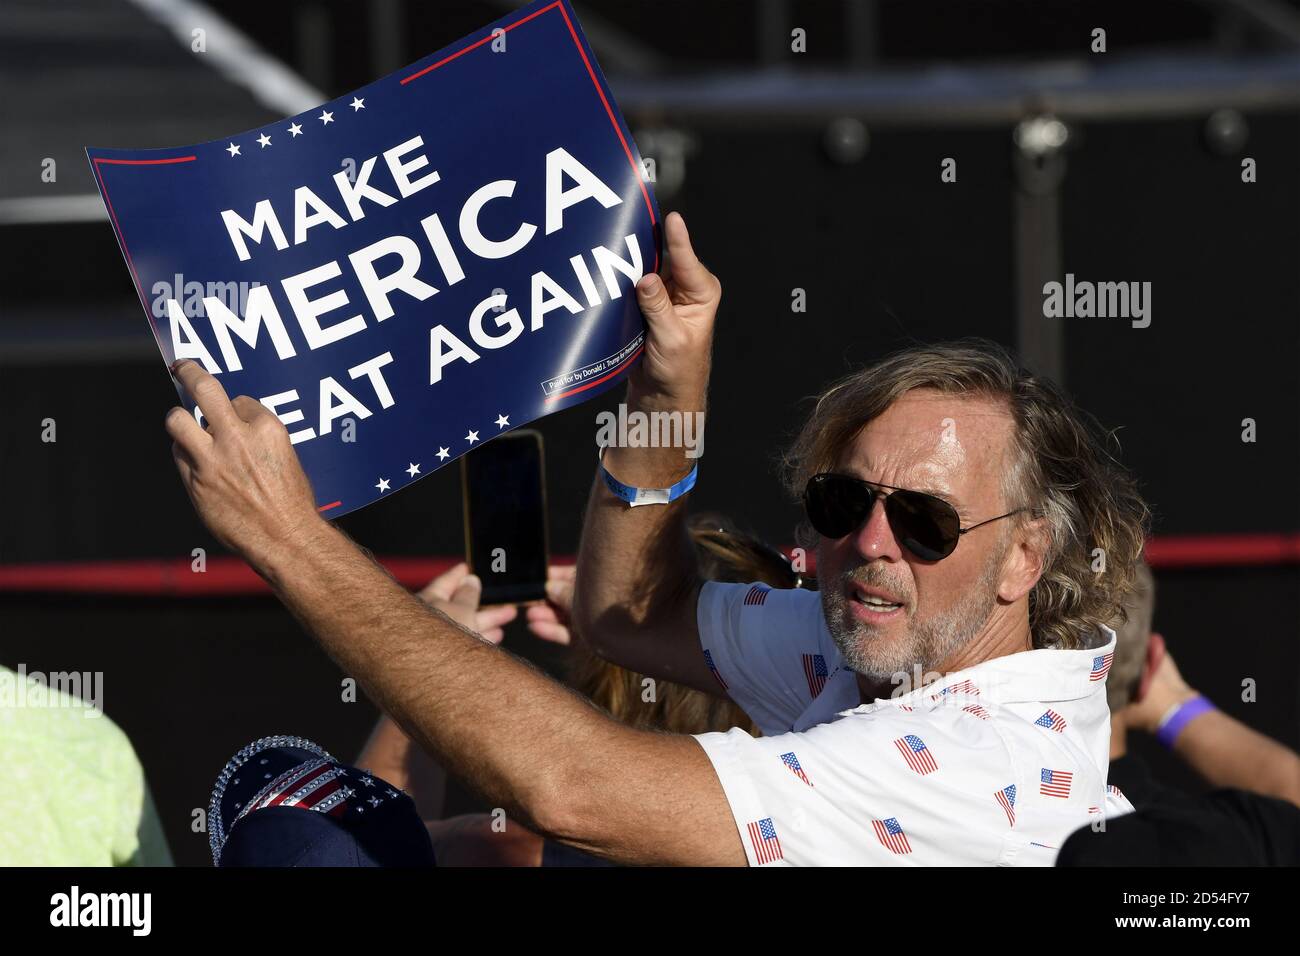 Sanford, United States. 12th Oct, 2020. Central Floridia holds up a 'Make America Great again' poster as he attends the rally held by President Donald Trump in Sanford, Florida on Monday, October 12, 2020. This is the president's first rally since being diagnosed with Covid-19. Photo by Joe Marino/UPI Credit: UPI/Alamy Live News Stock Photo